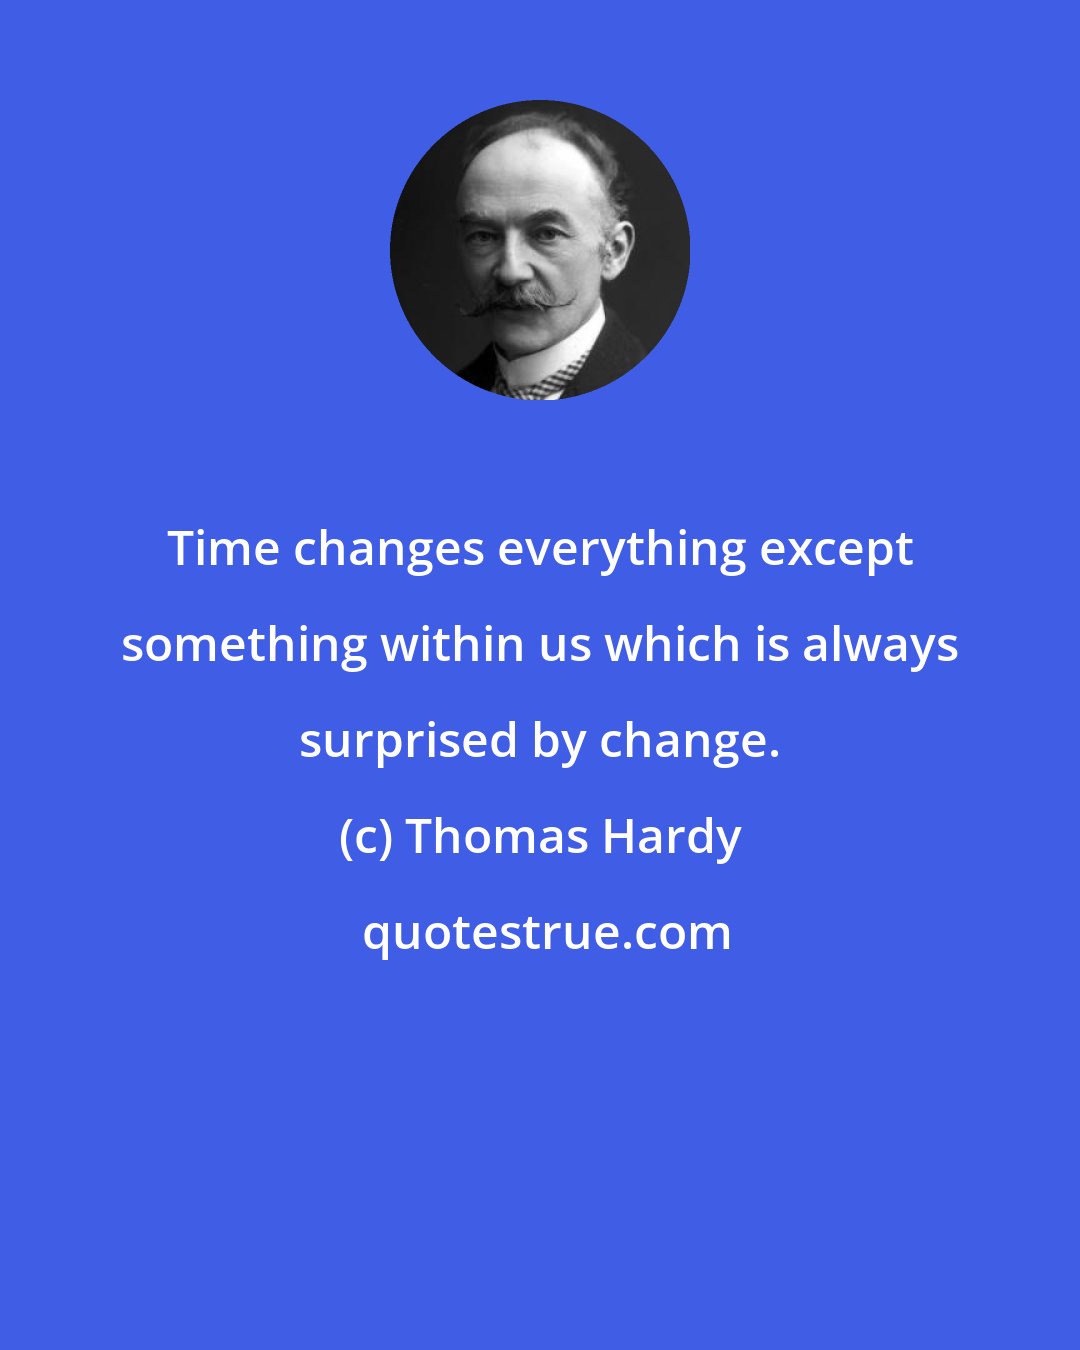 Thomas Hardy: Time changes everything except something within us which is always surprised by change.